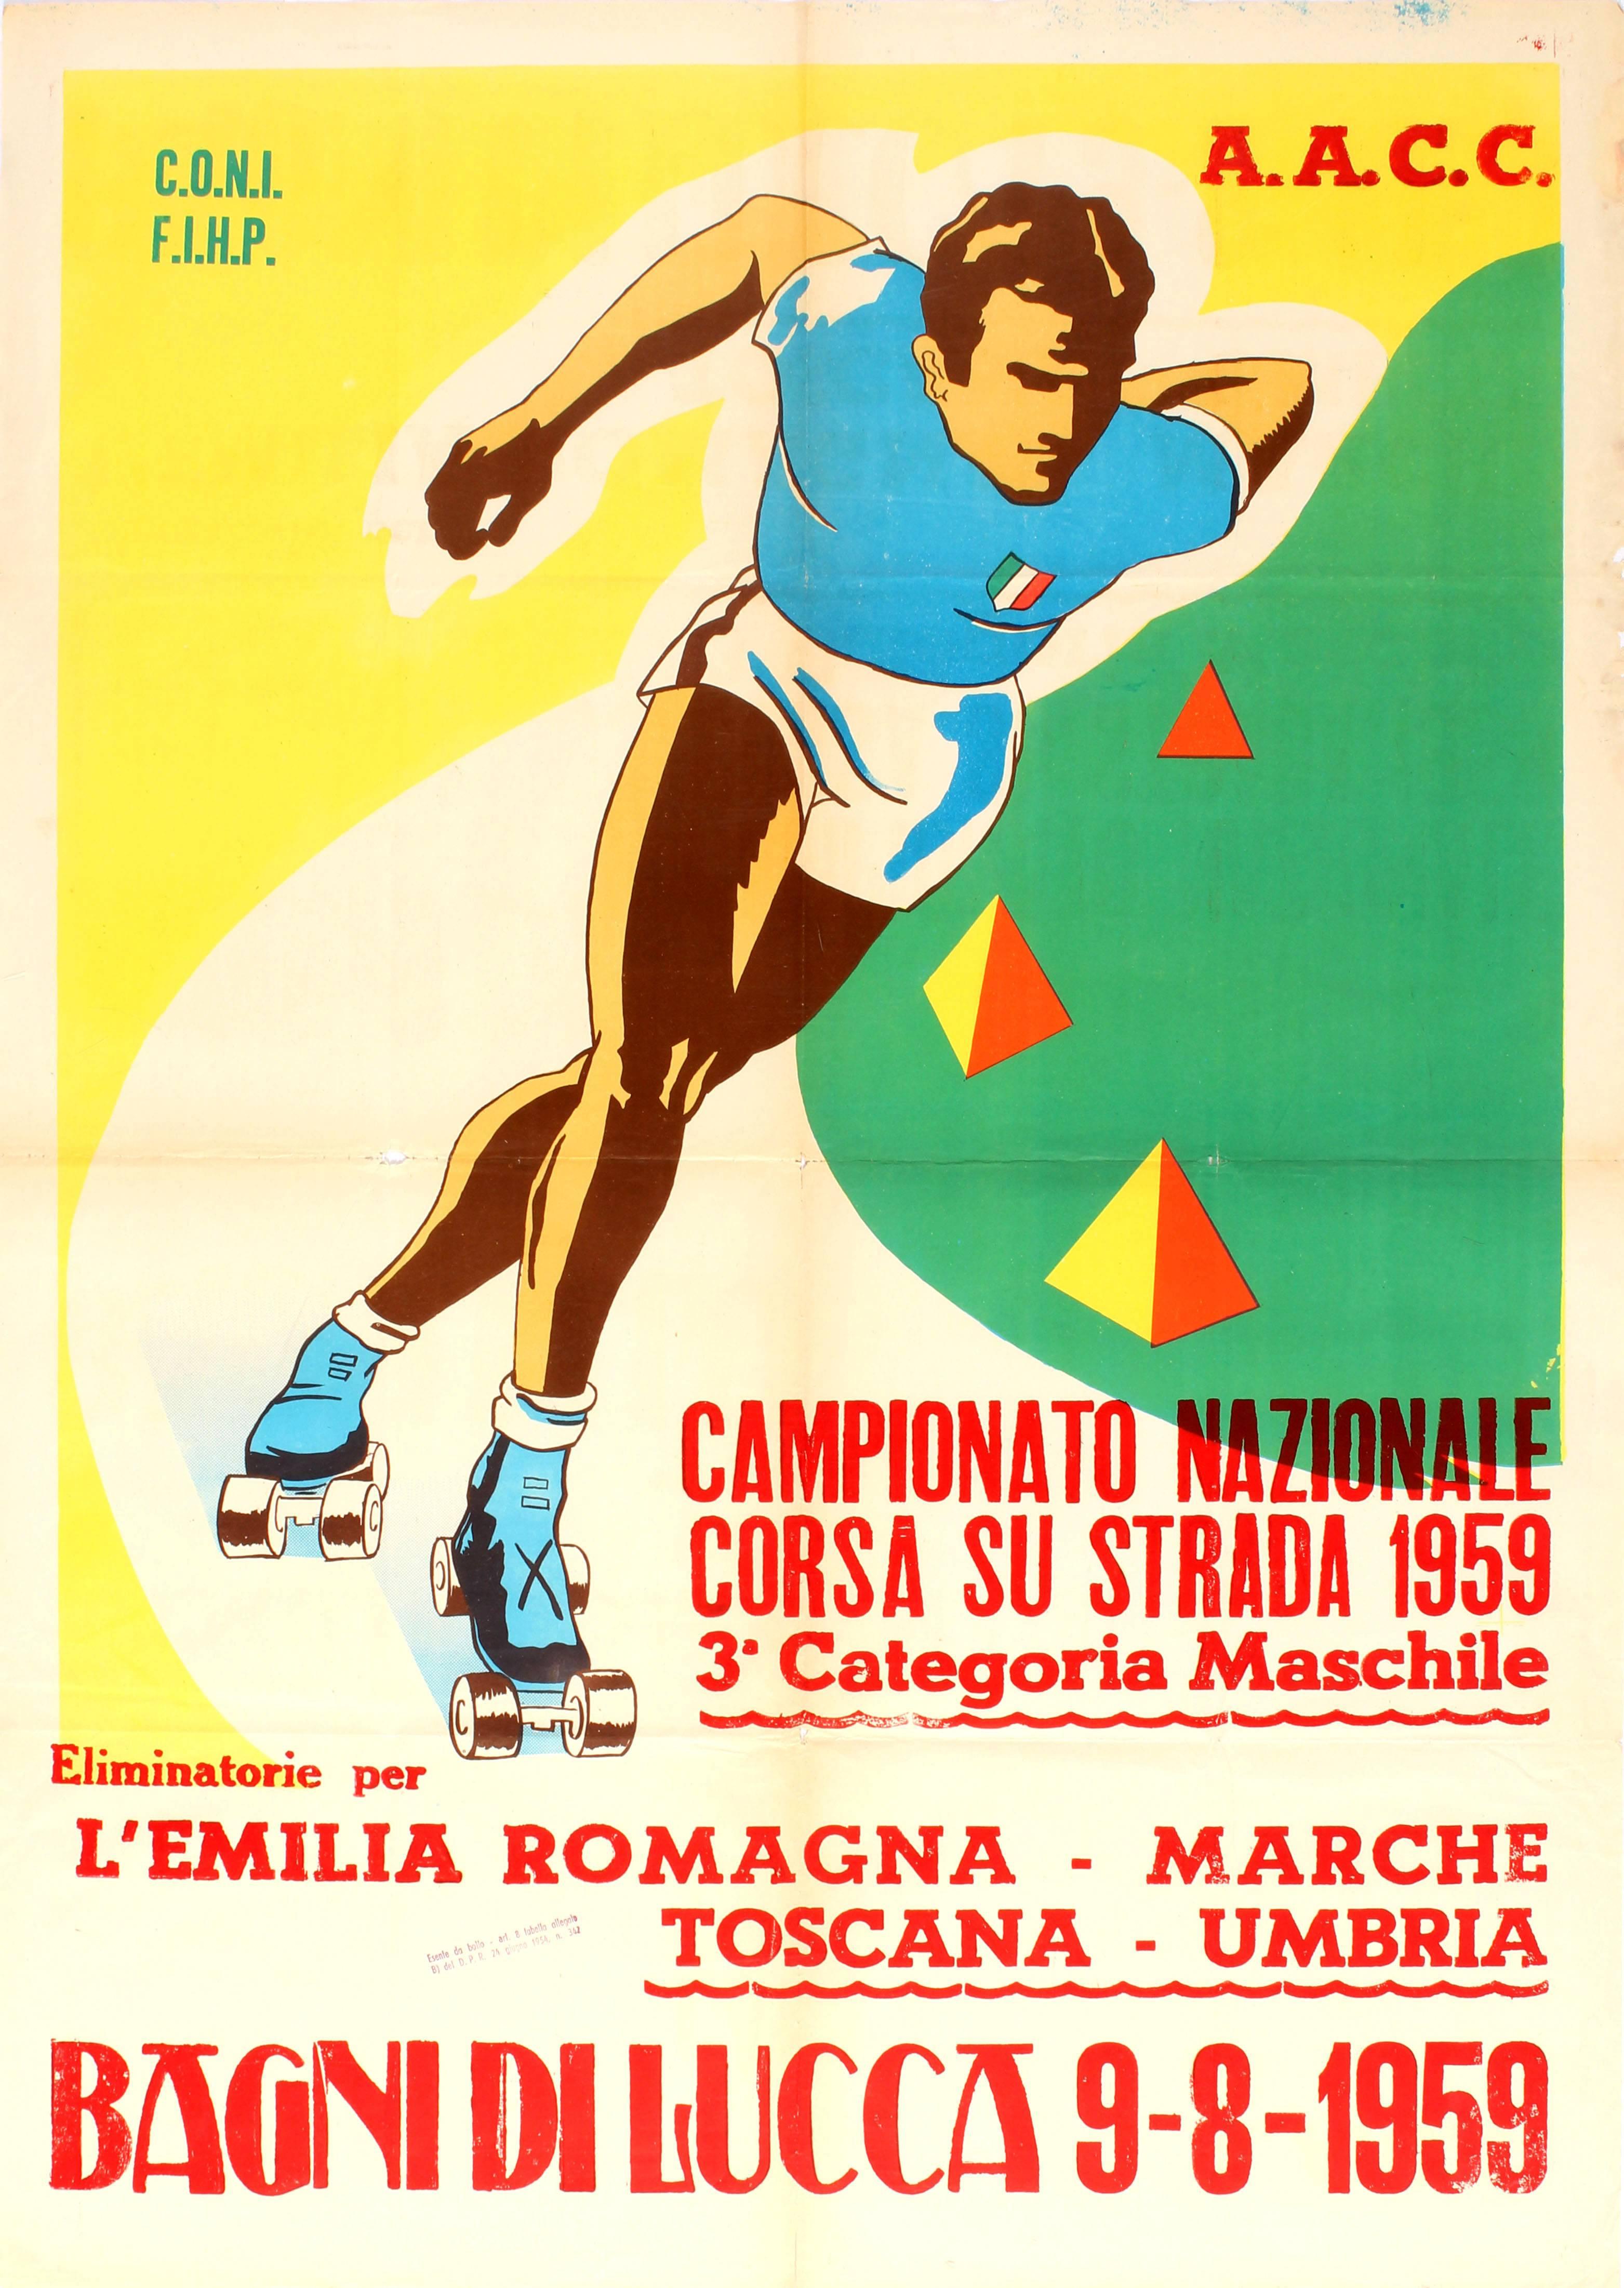 Unknown Print - Original Sport Poster For The National Championship Road Roller Skating Races